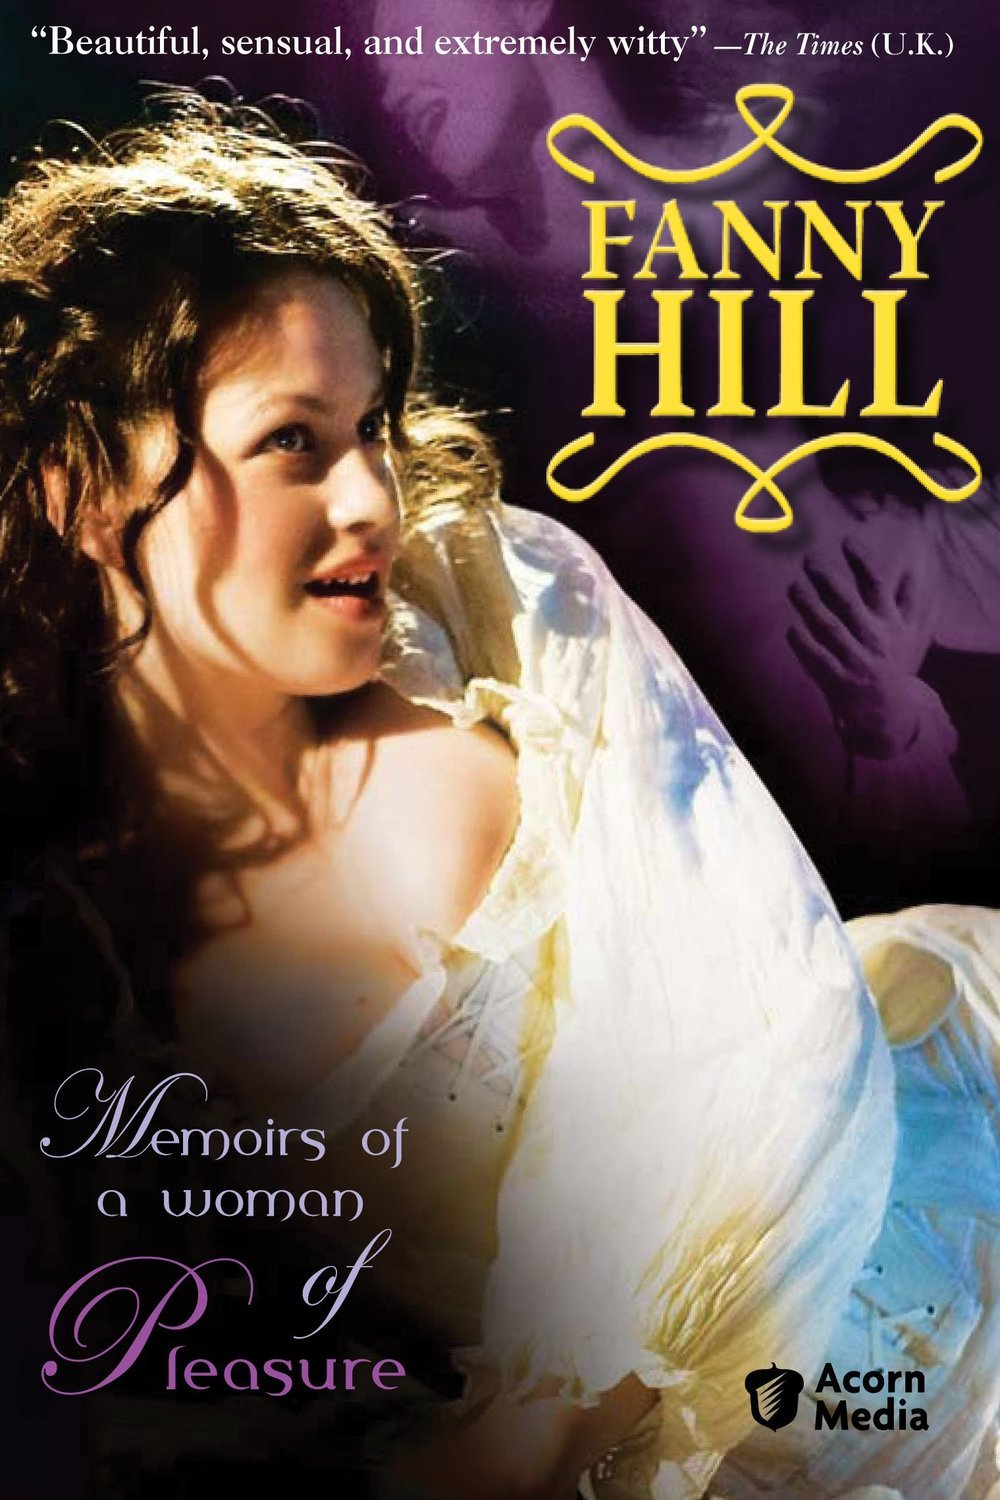 Poster of the movie Fanny Hill